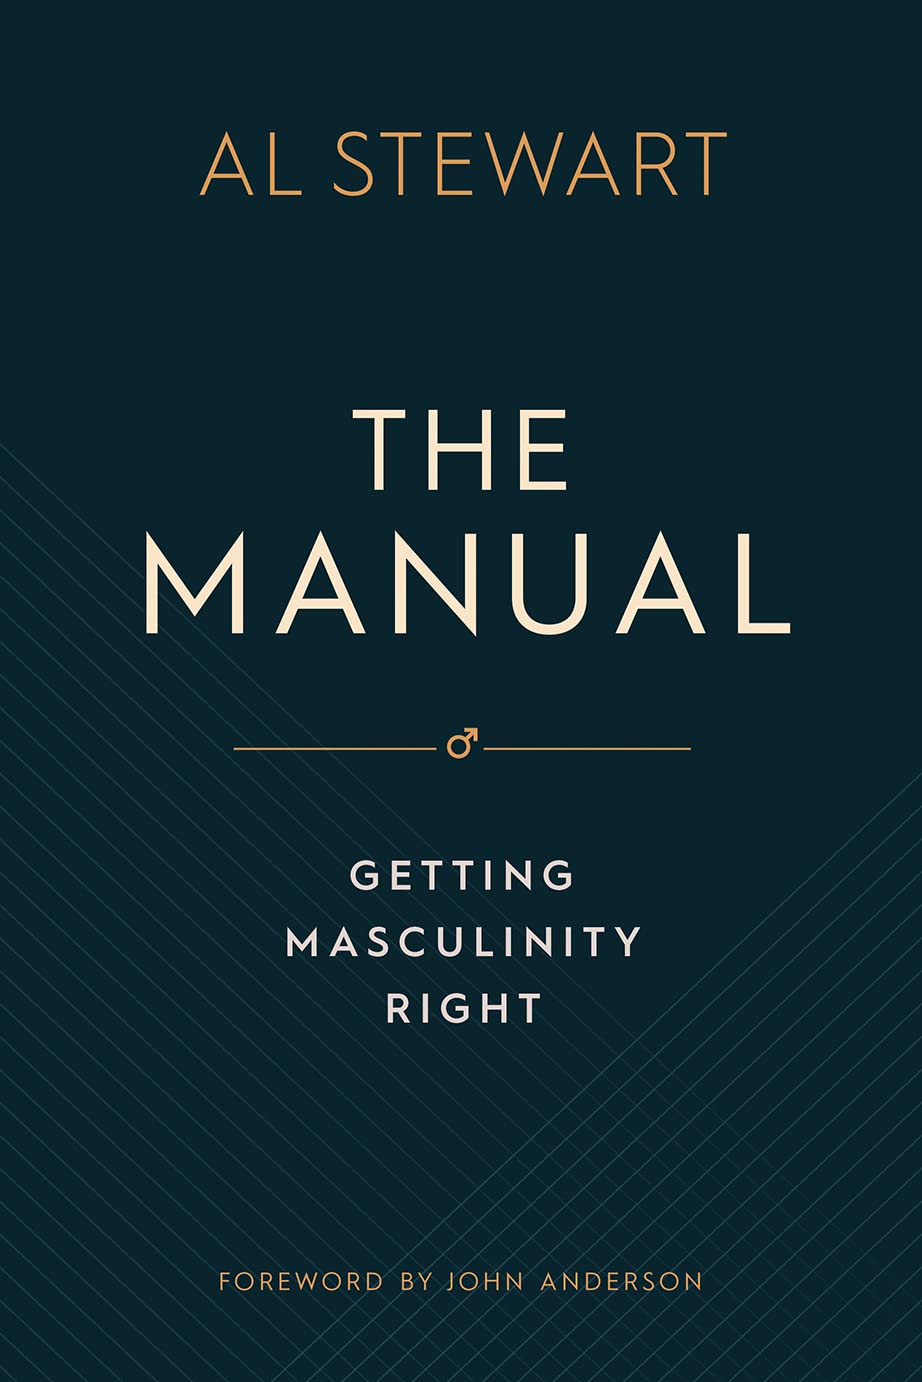 The Art of Getting Even, The Do-It-Yourself Justice Manual by